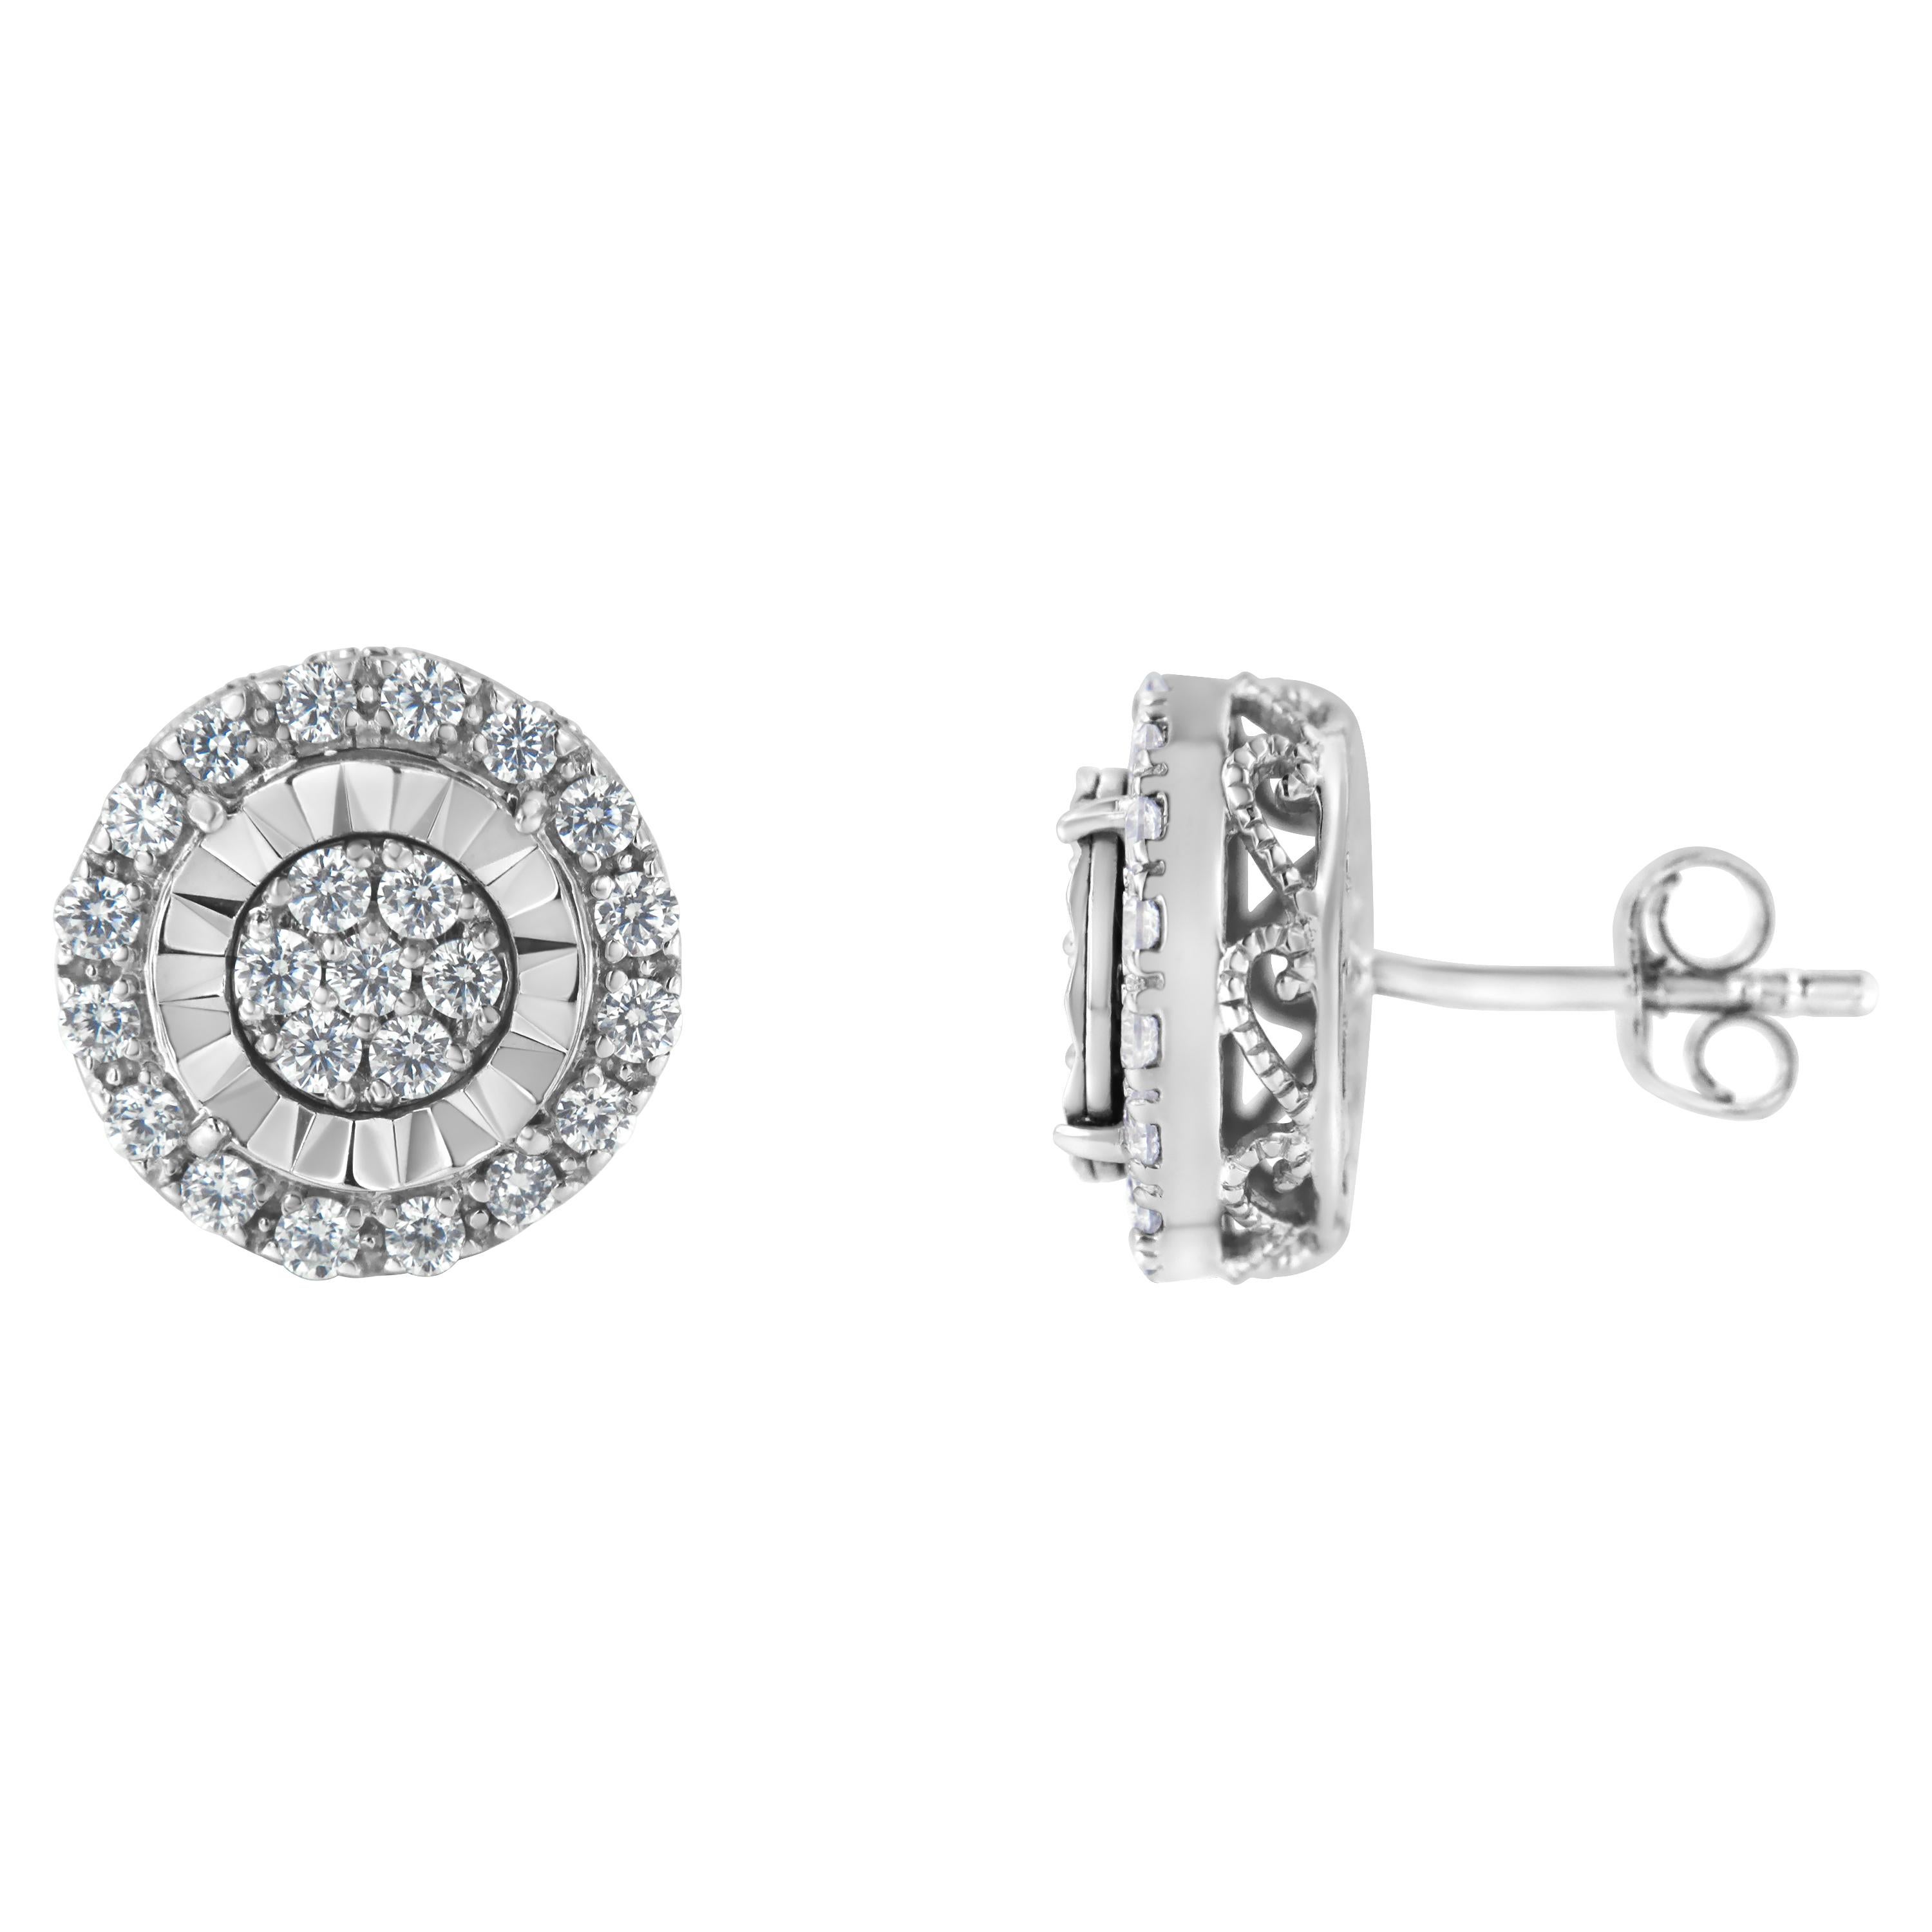 Beautiful and delicate, these sterling silver 1ct diamond cluster stud earrings feature 7 round cut diamonds encircled by a halo of an additional 16 diamonds. All prong set diamonds are mounted on top of a filigree decorated box. With a push back